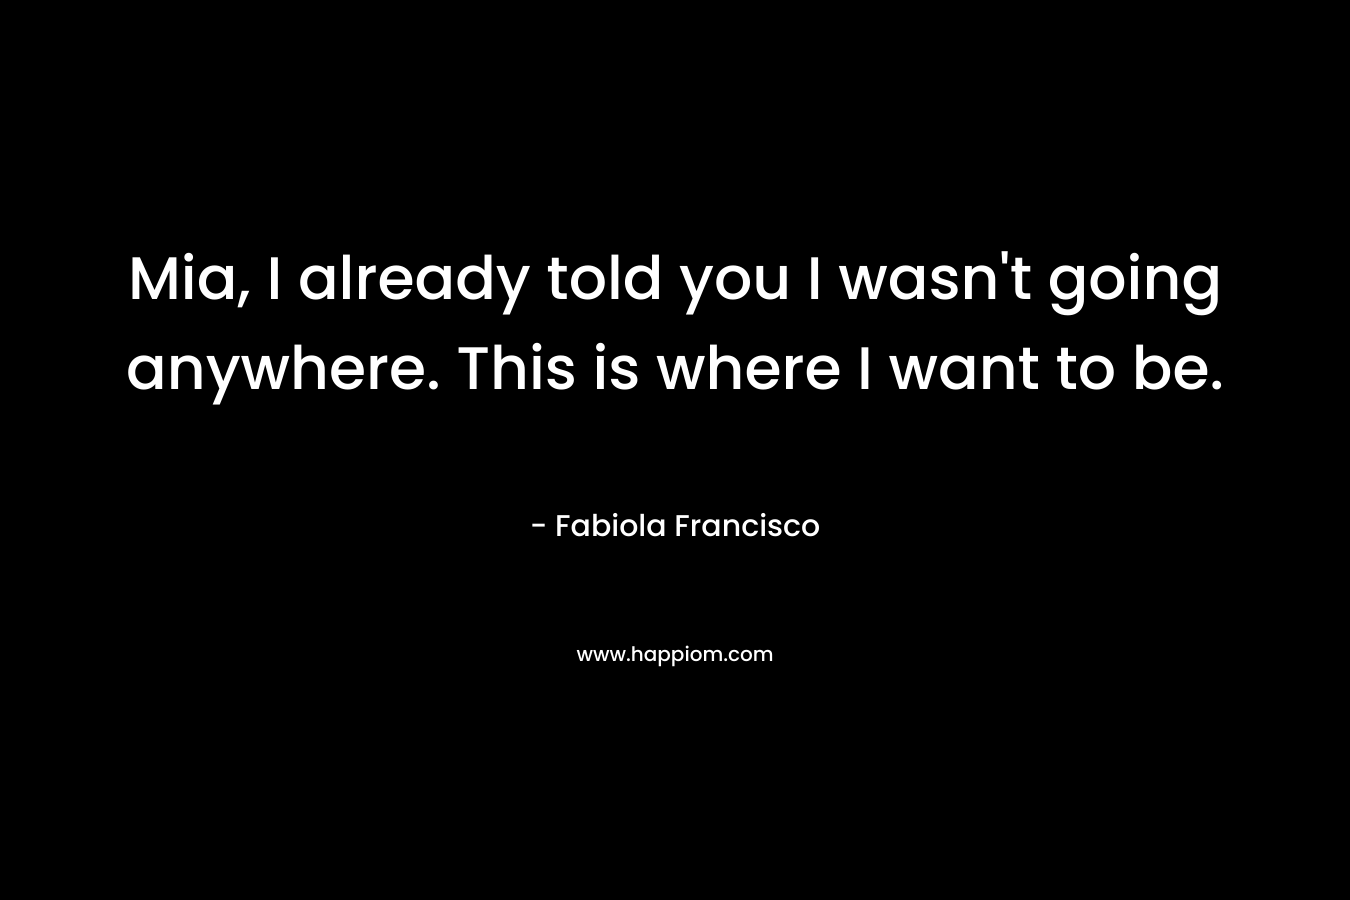 Mia, I already told you I wasn’t going anywhere. This is where I want to be. – Fabiola Francisco